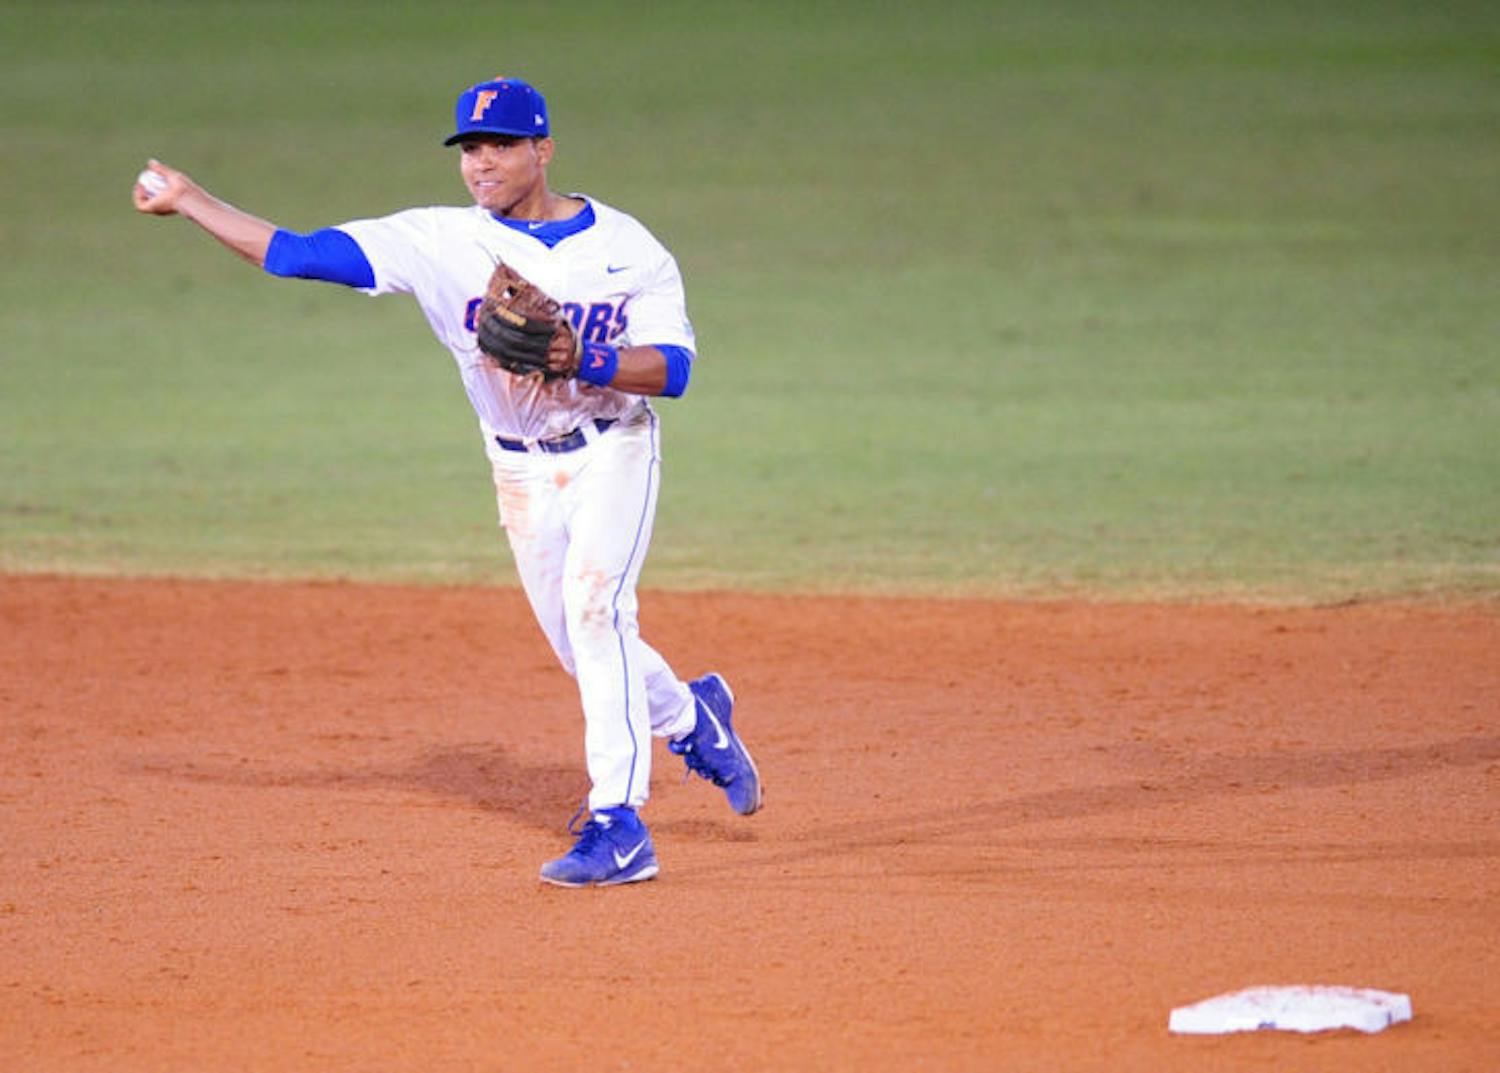 Richie Martin fields a ball during Florida’s 4-0 shutout over Maryland on Feb. 14 at McKethan Stadium.